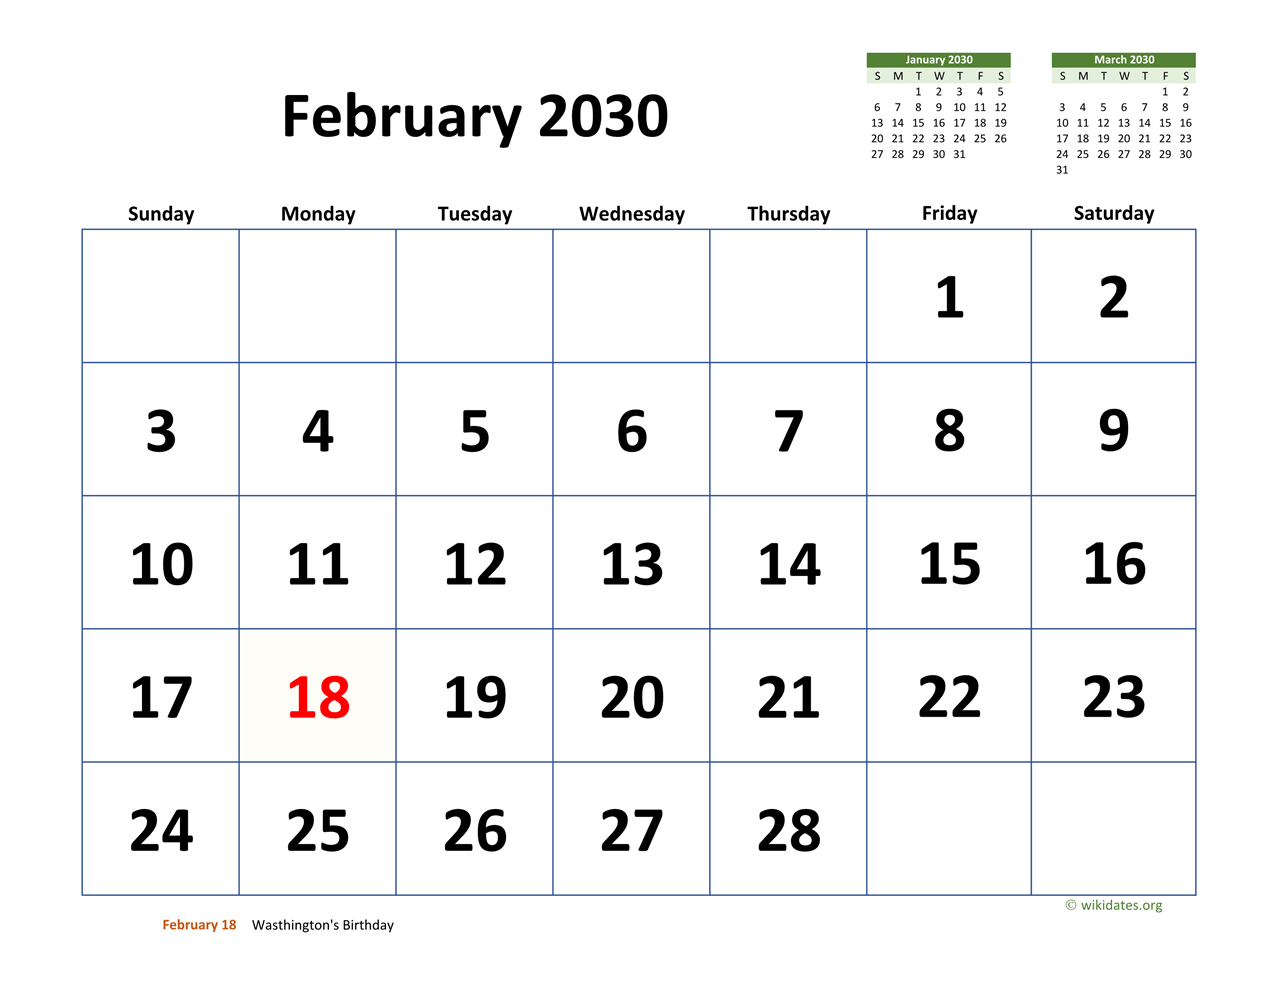 February 2030 Calendar with Extralarge Dates